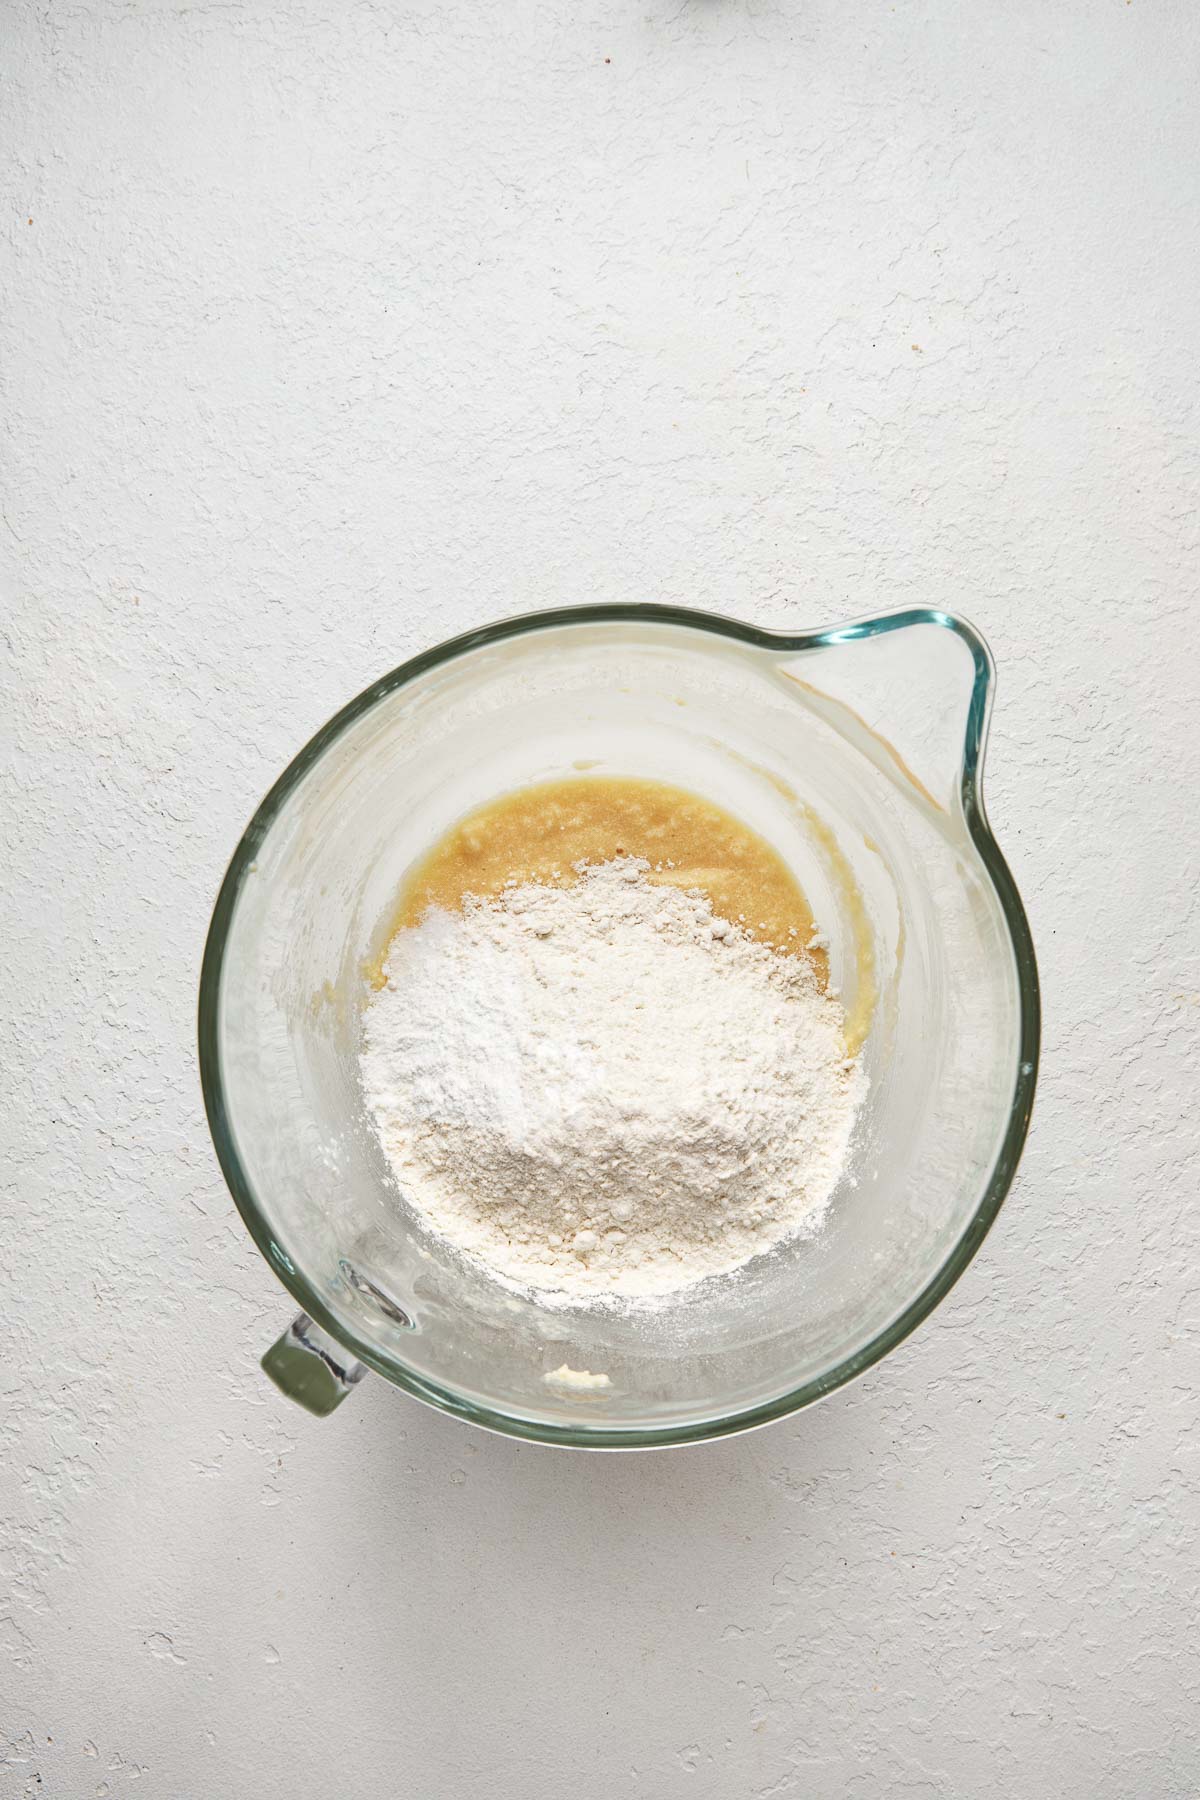 Top view of a glass mixing bowl with a creamed mixture in the bottom and flour on top.